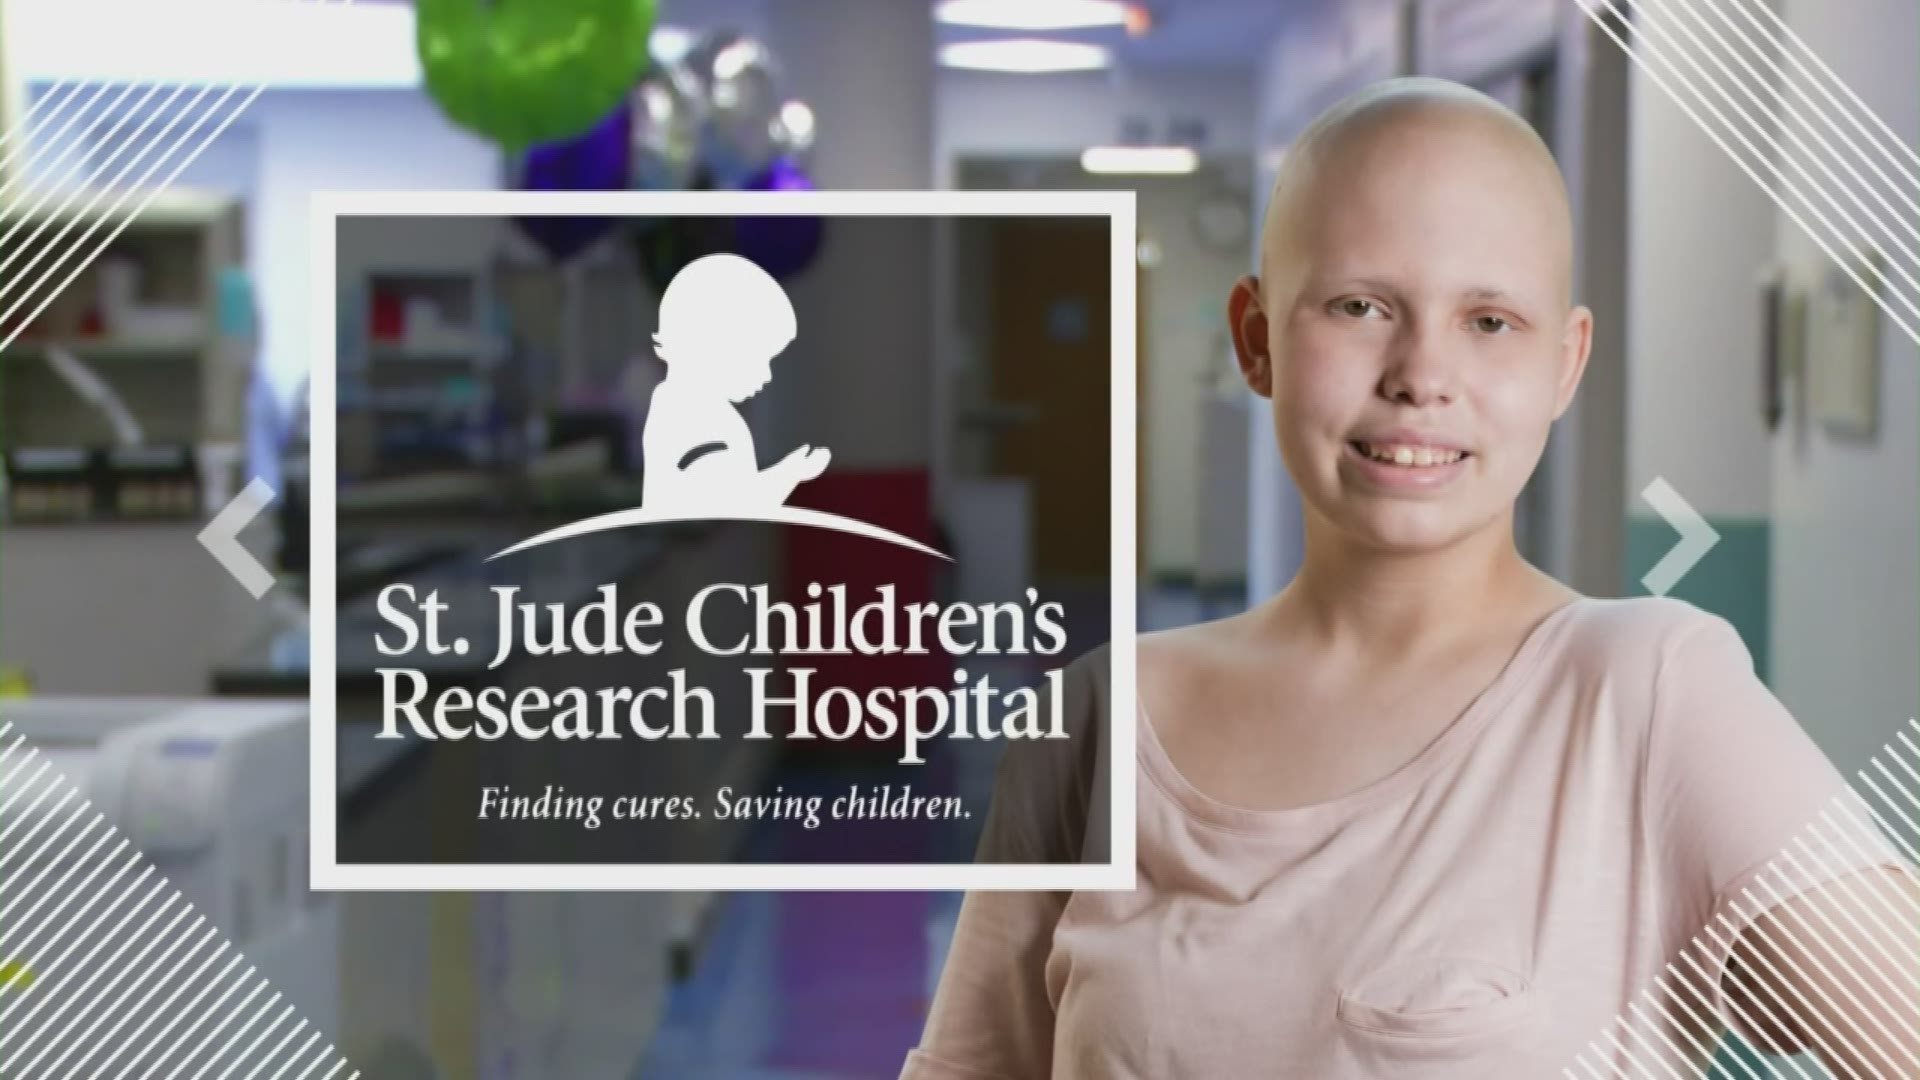 The mission of St. Jude is supported by your generosity and goes well beyond the research that is freely shared and the medical care that comes at no cost to any family.